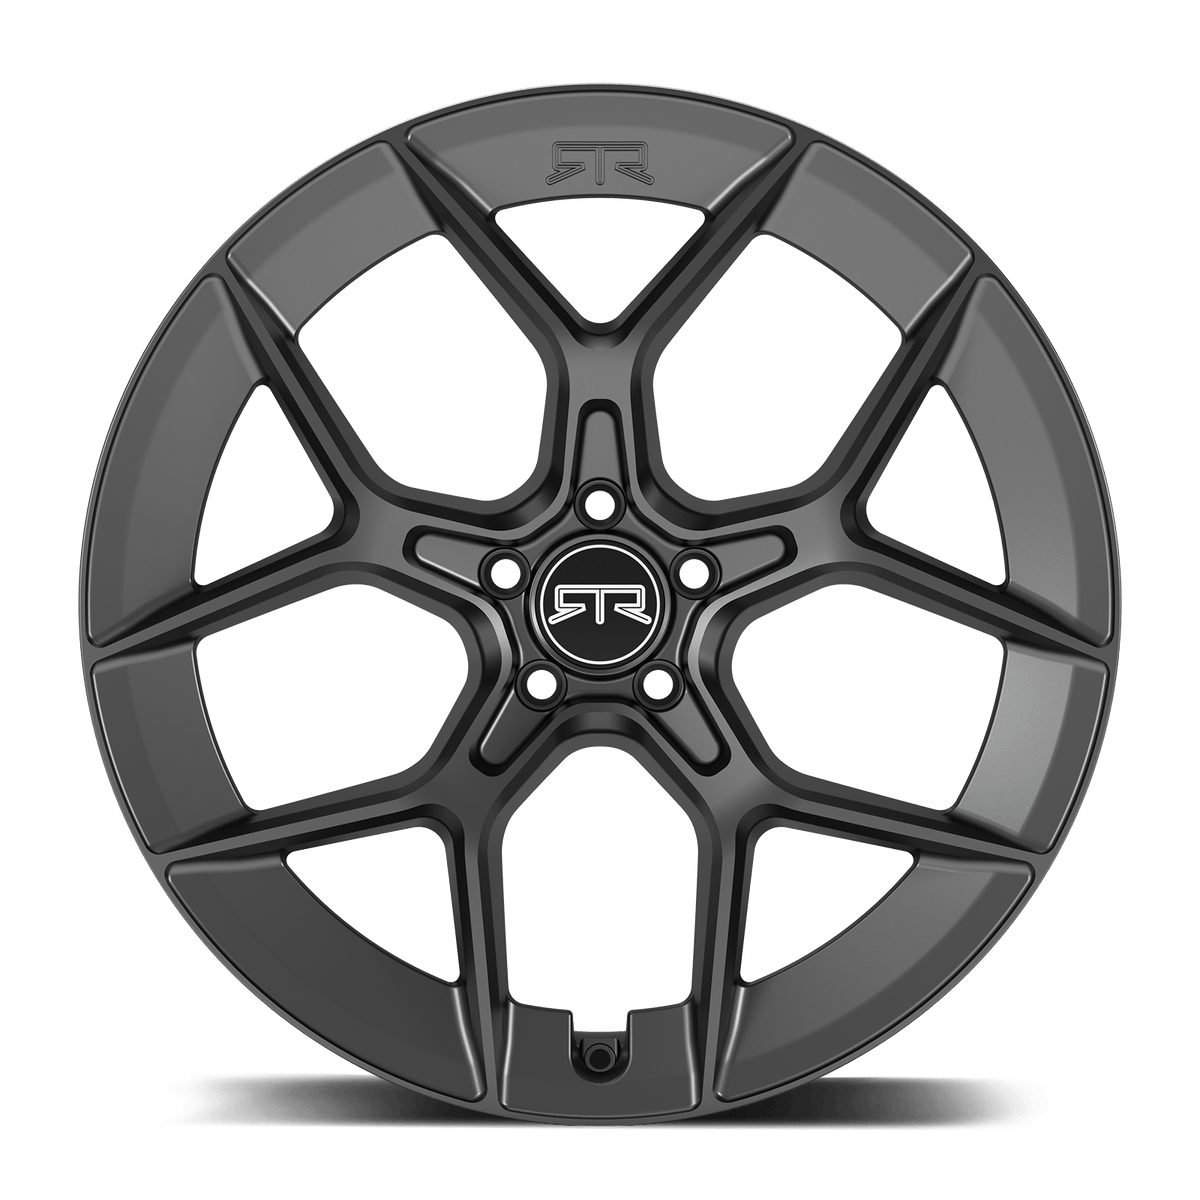 &quot;RTR Aero 5 Mustang Mach-E Wheel | Satin Black/Satin Charcoal | 20x8.5 +31 Offset | Fits 2021+ Mustang Mach-E | Flow Forming Technology | Hub-Centric Design | Enhanced Aerodynamics | Precision Craftsmanship | Upgrade Your Mach-E&#39;s Style and Performance&quot;